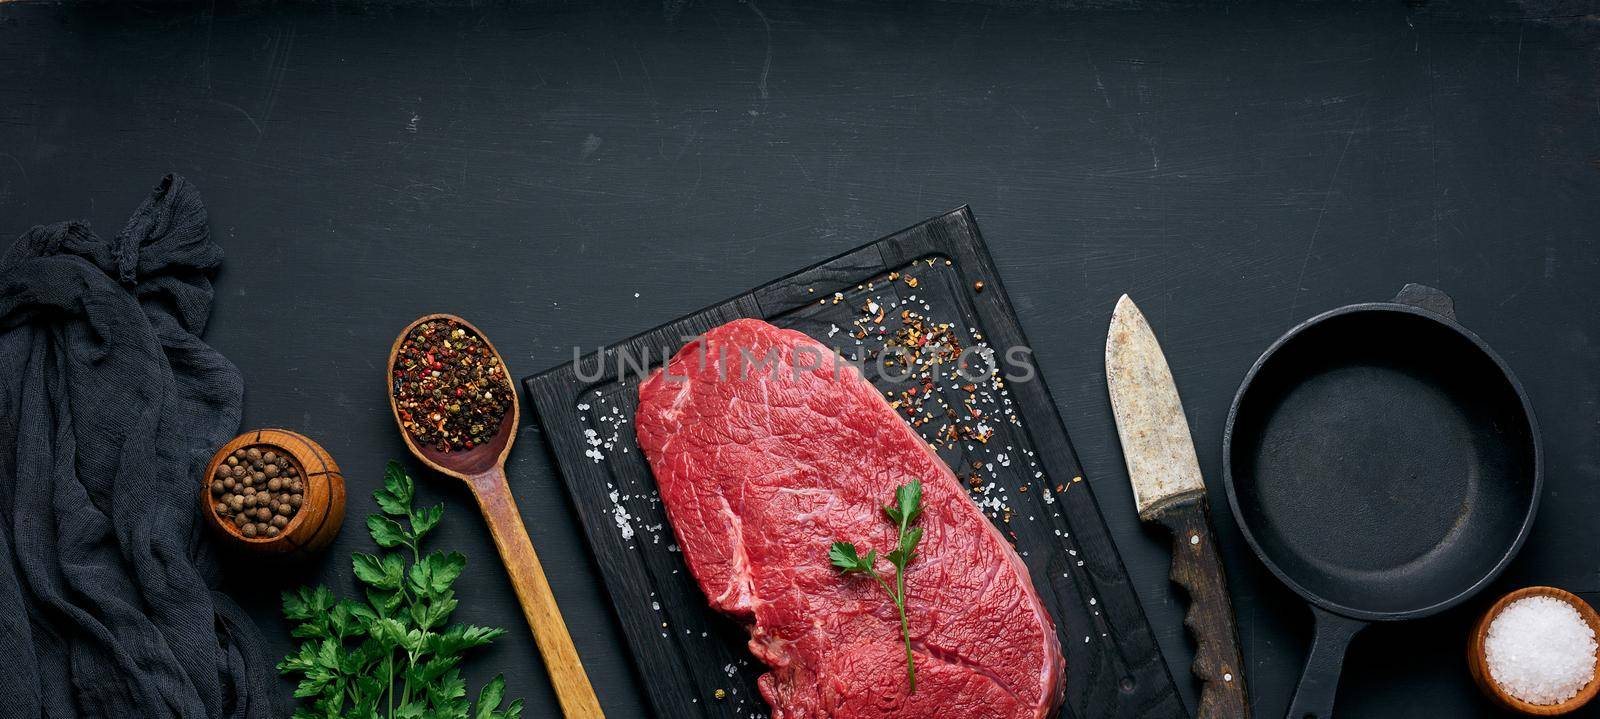 raw beef tenderloin lies on a wooden cutting board and spices for cooking on a black table, top view by ndanko